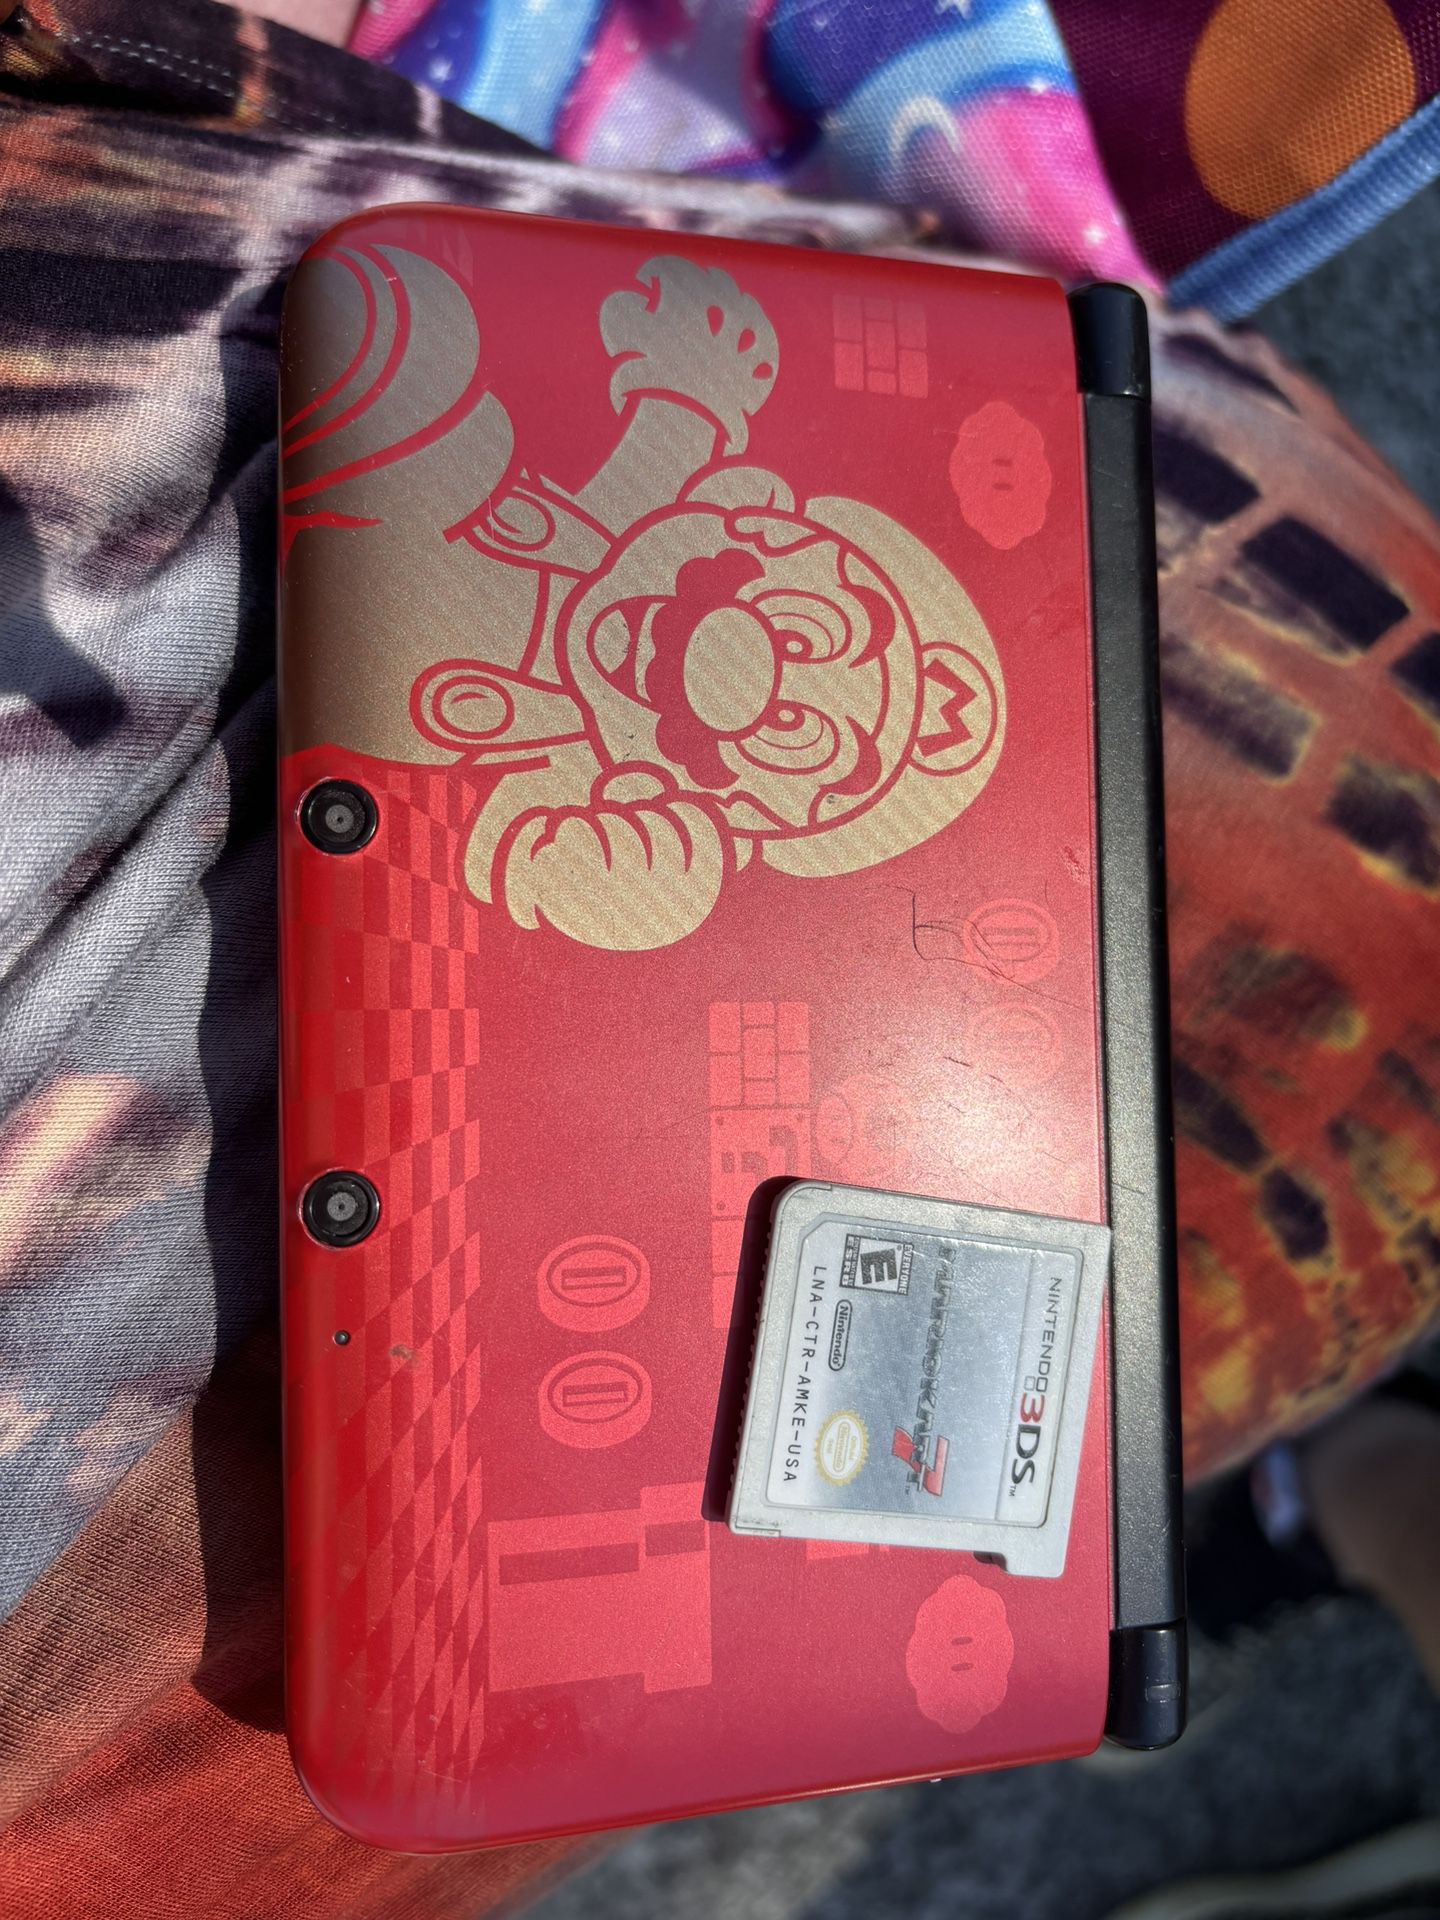 3ds Comes With Charger